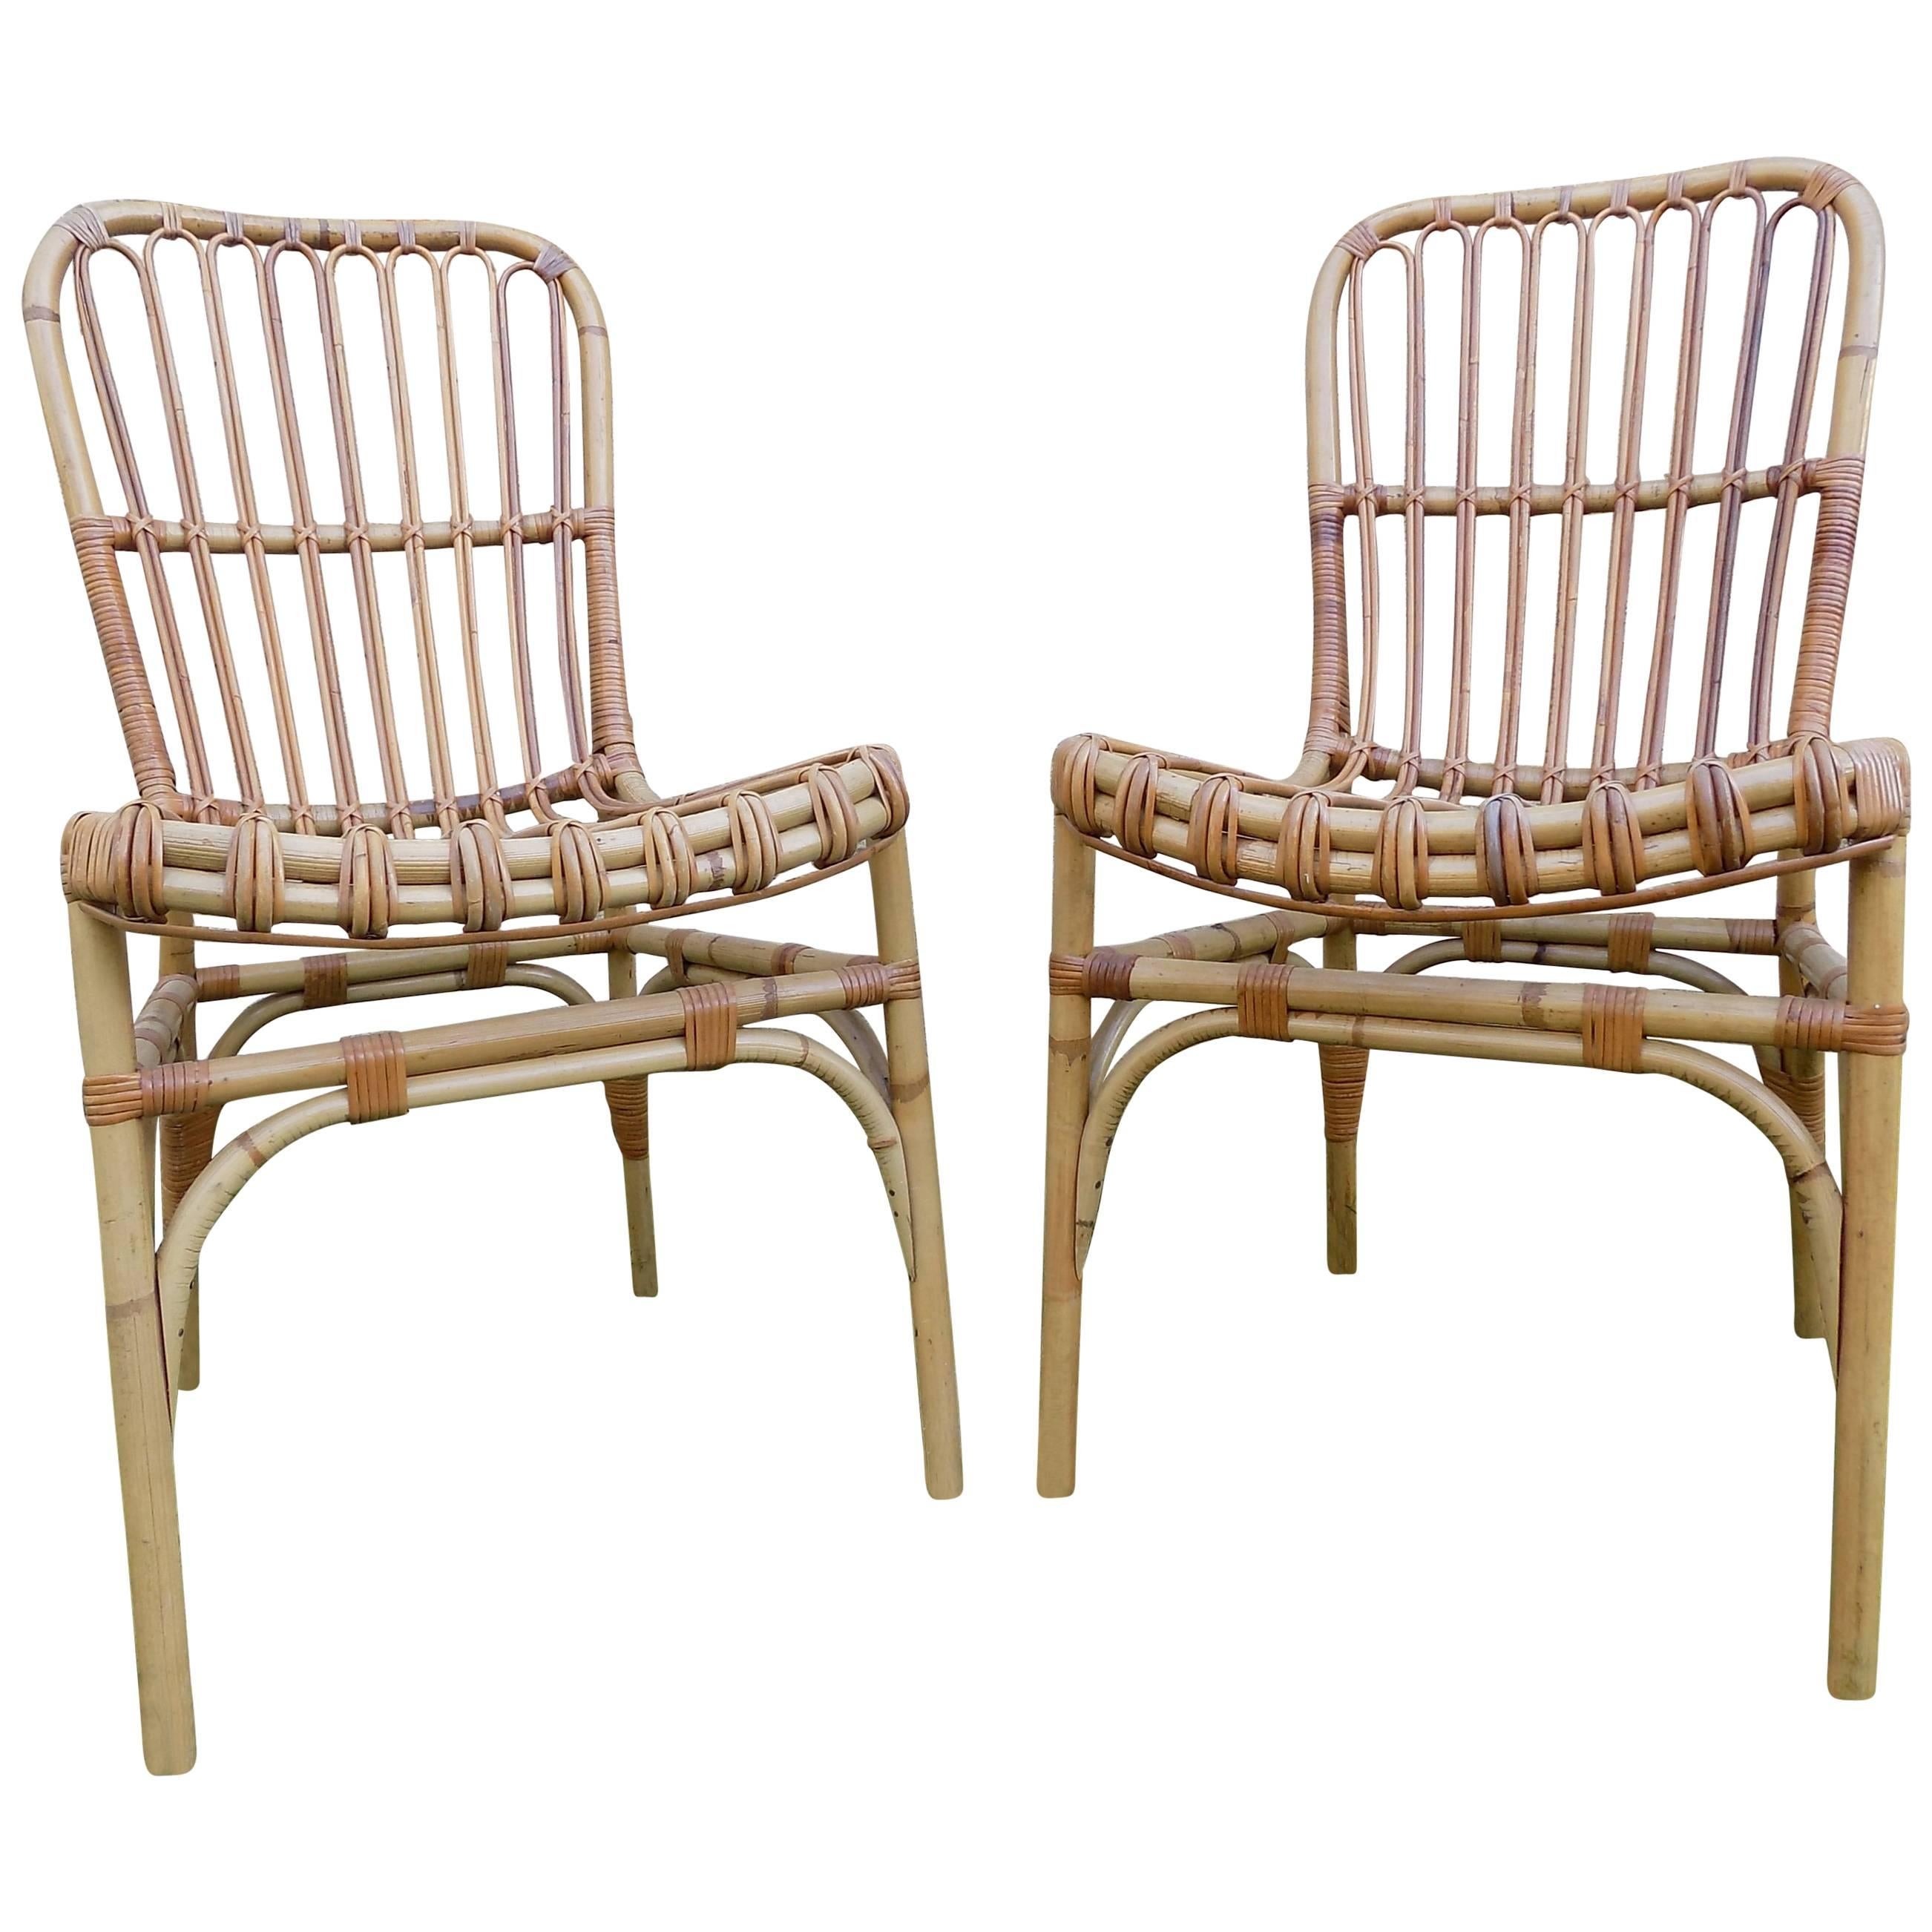 Beautiful Pair of Wicker Chair by Audoux Minet, circa 1960 For Sale